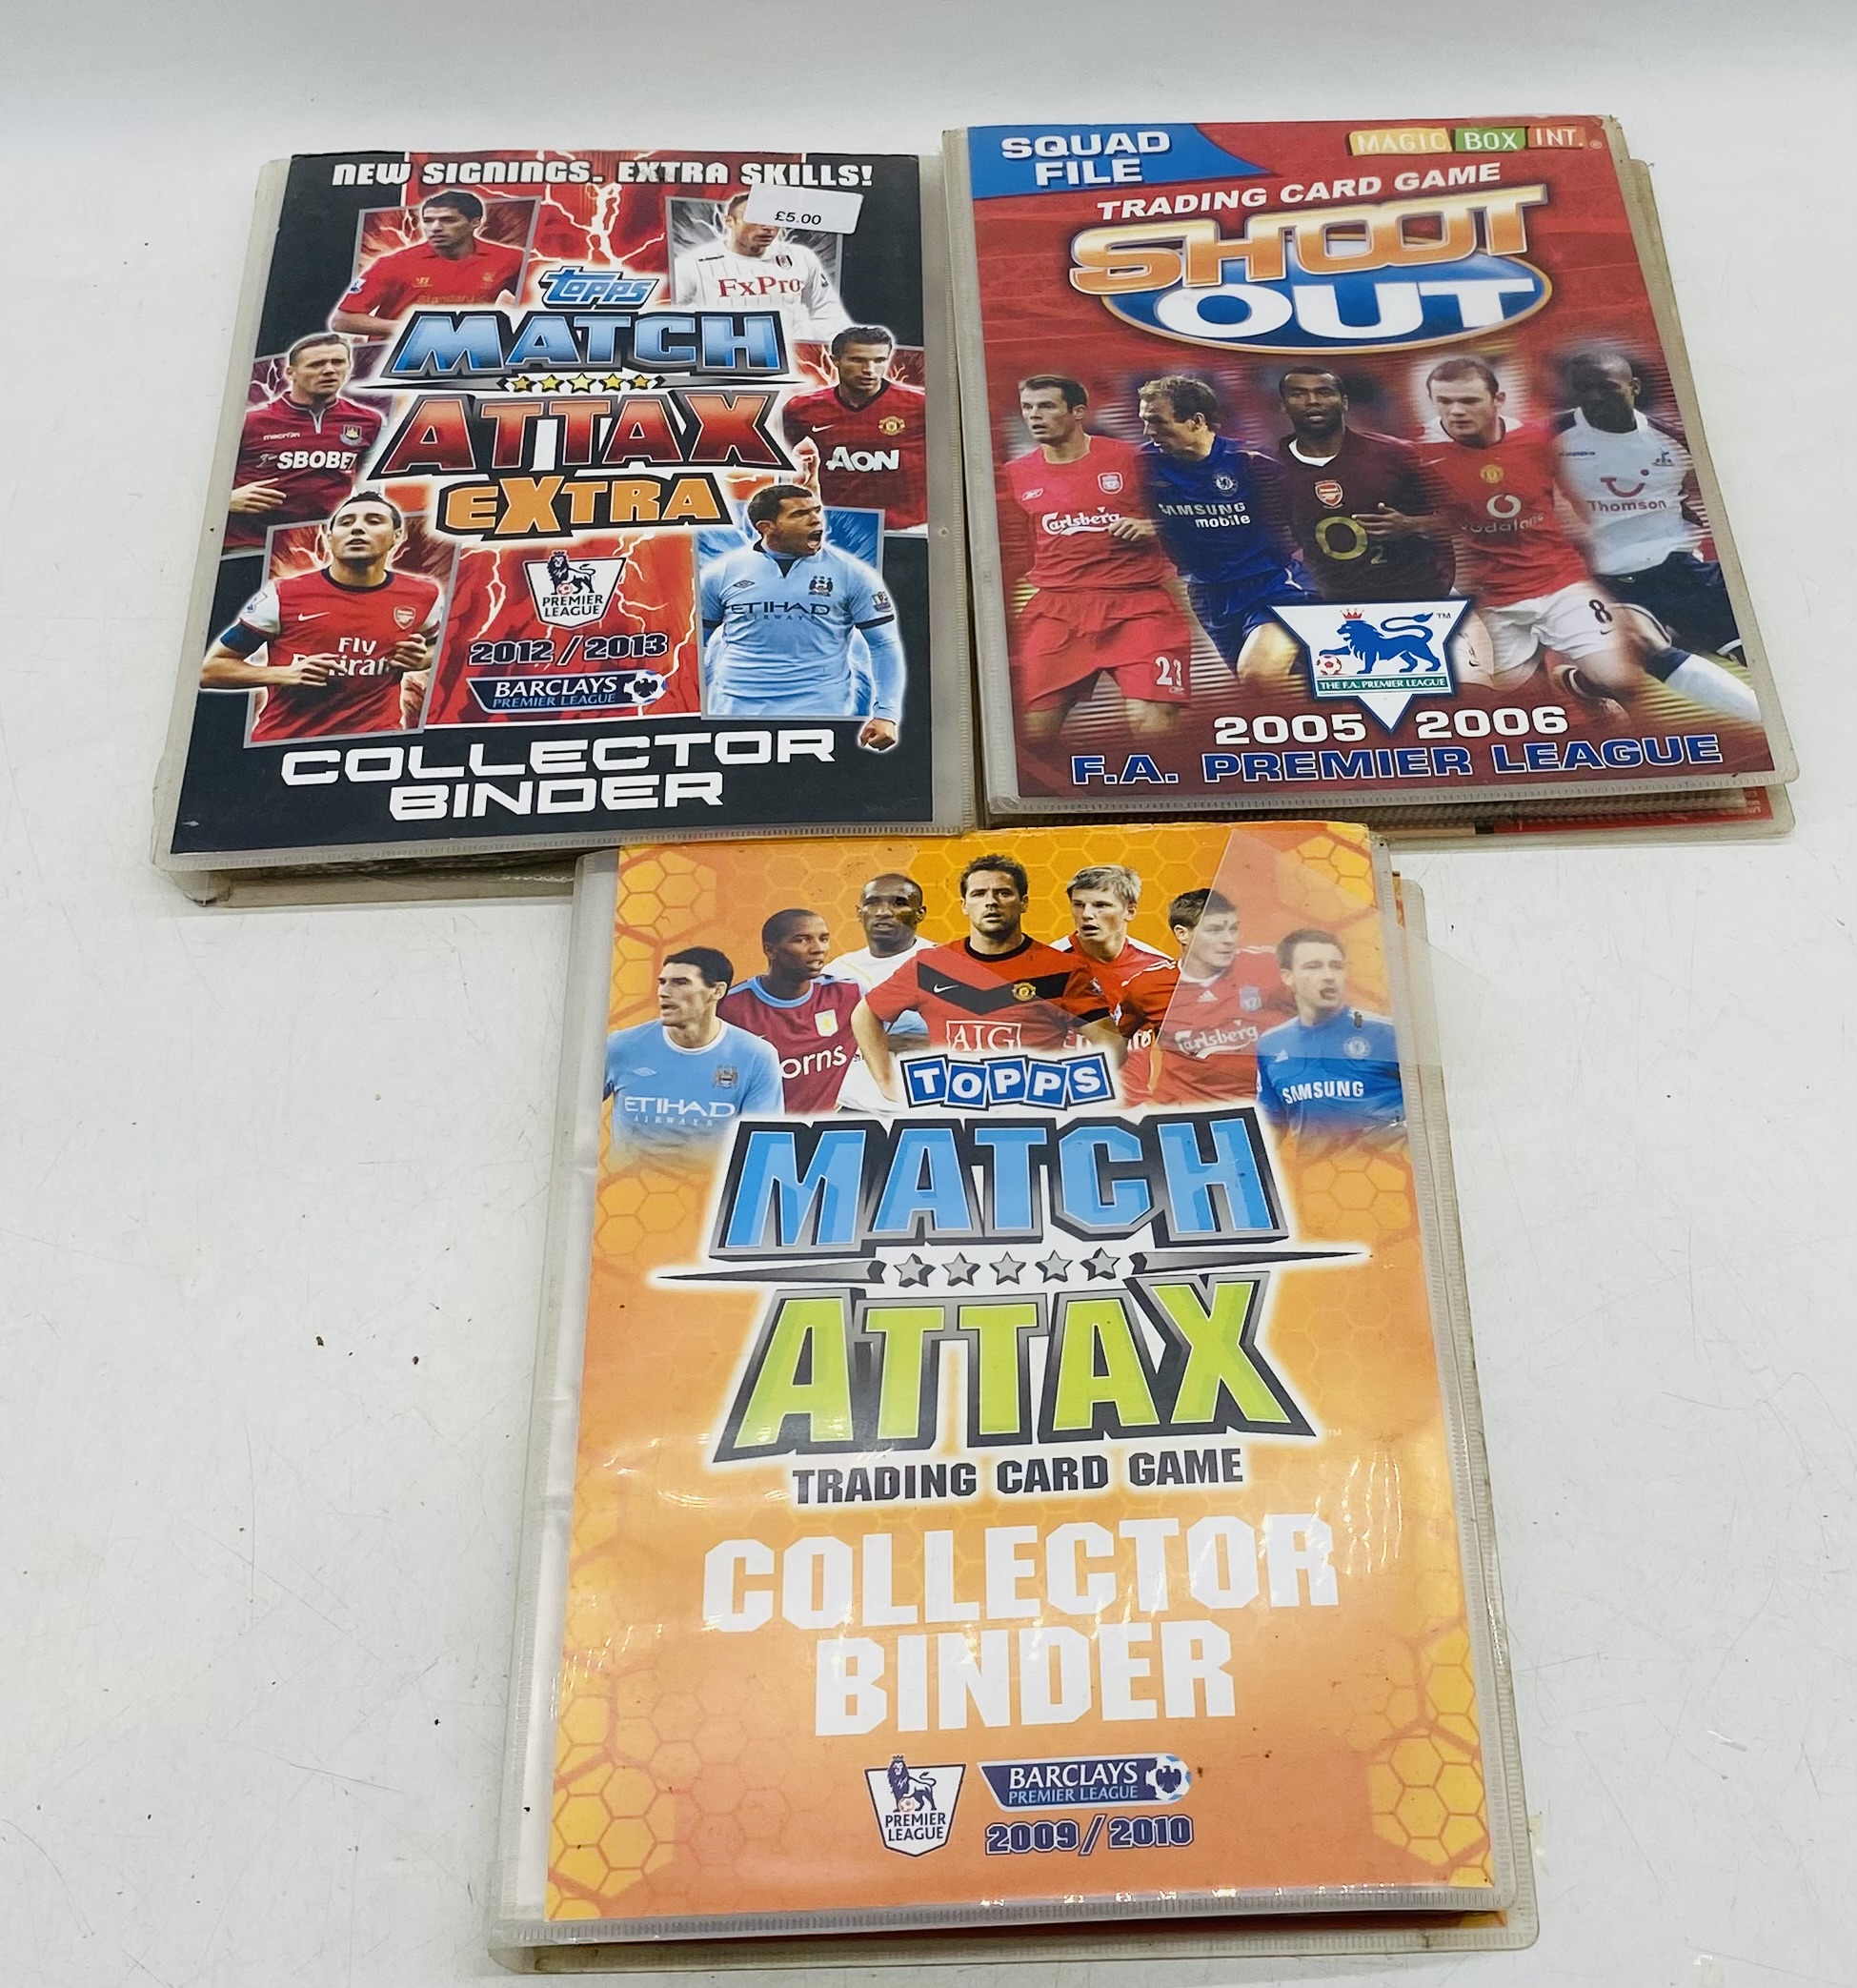 A collection of Topps Match Attax Football Premier League trading cards in collector binders - - Image 5 of 7